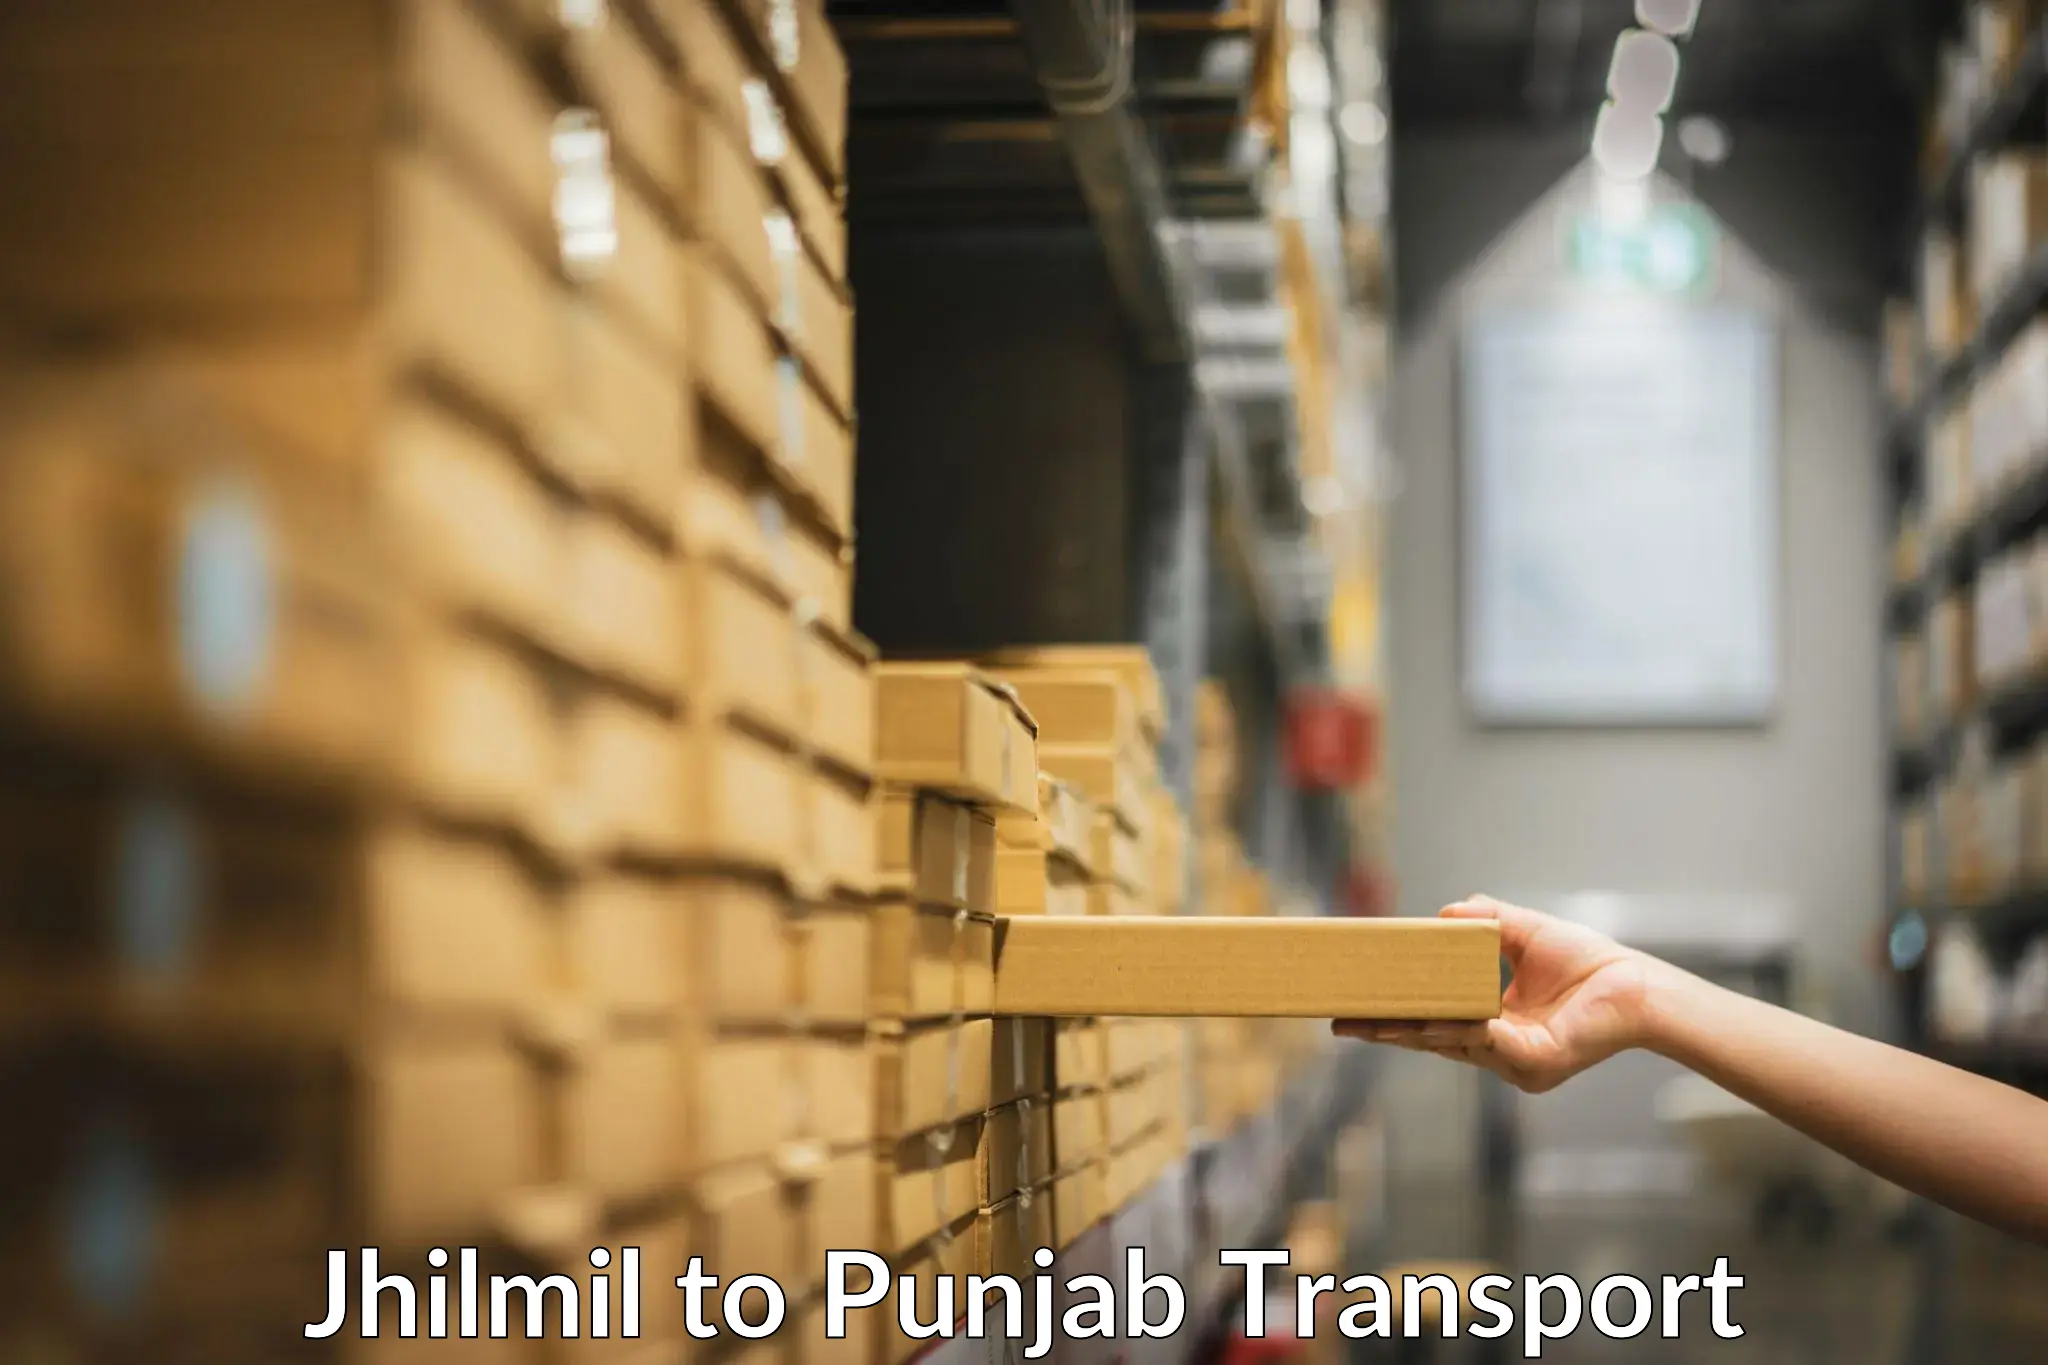 Furniture transport service Jhilmil to Patiala